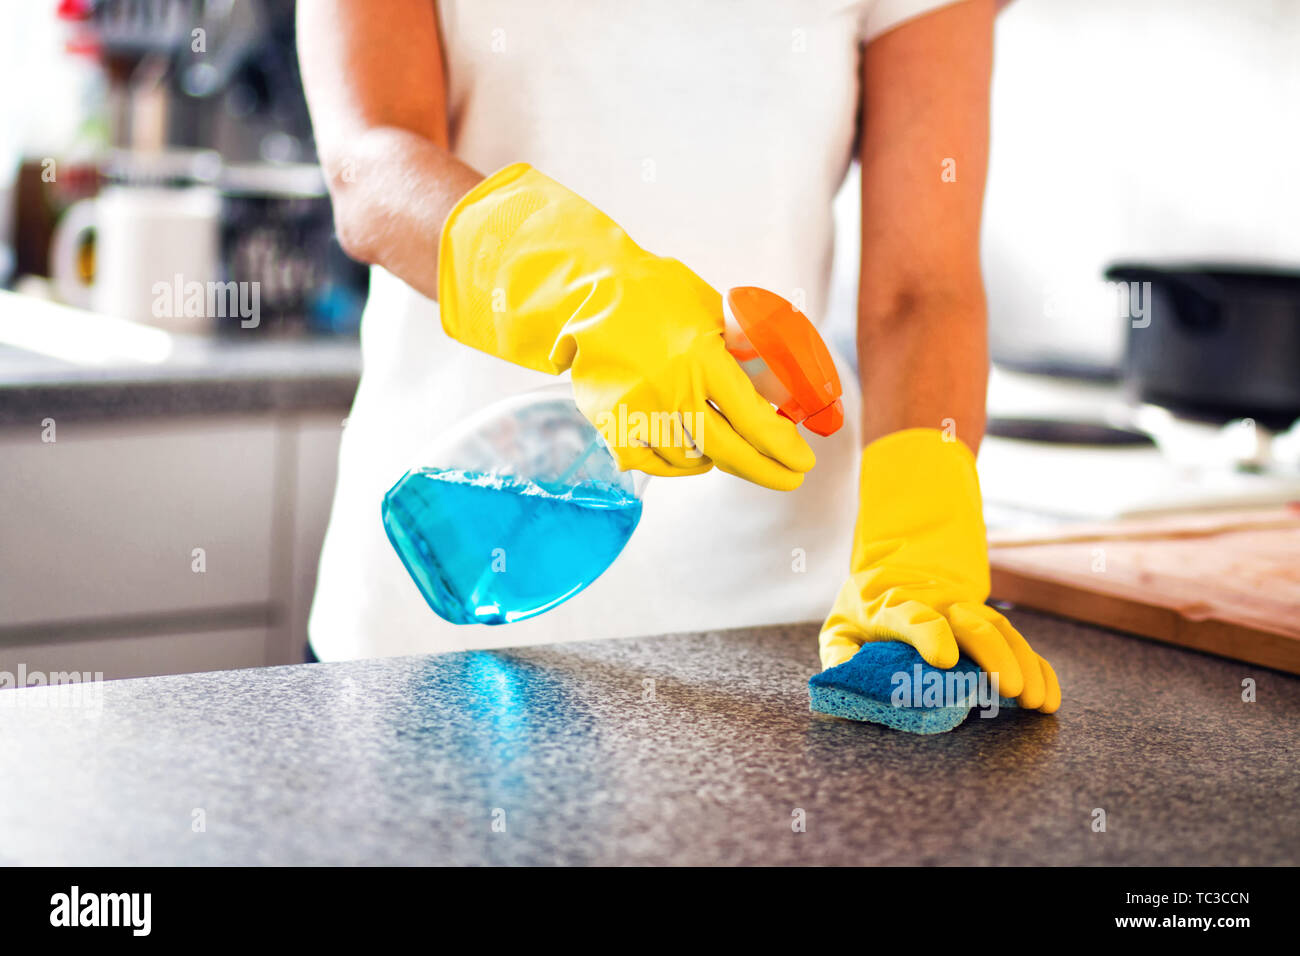 Woman Using Spray Polish To Clean Kitchen Surface. Woman cleaning kitchen Stock Photo